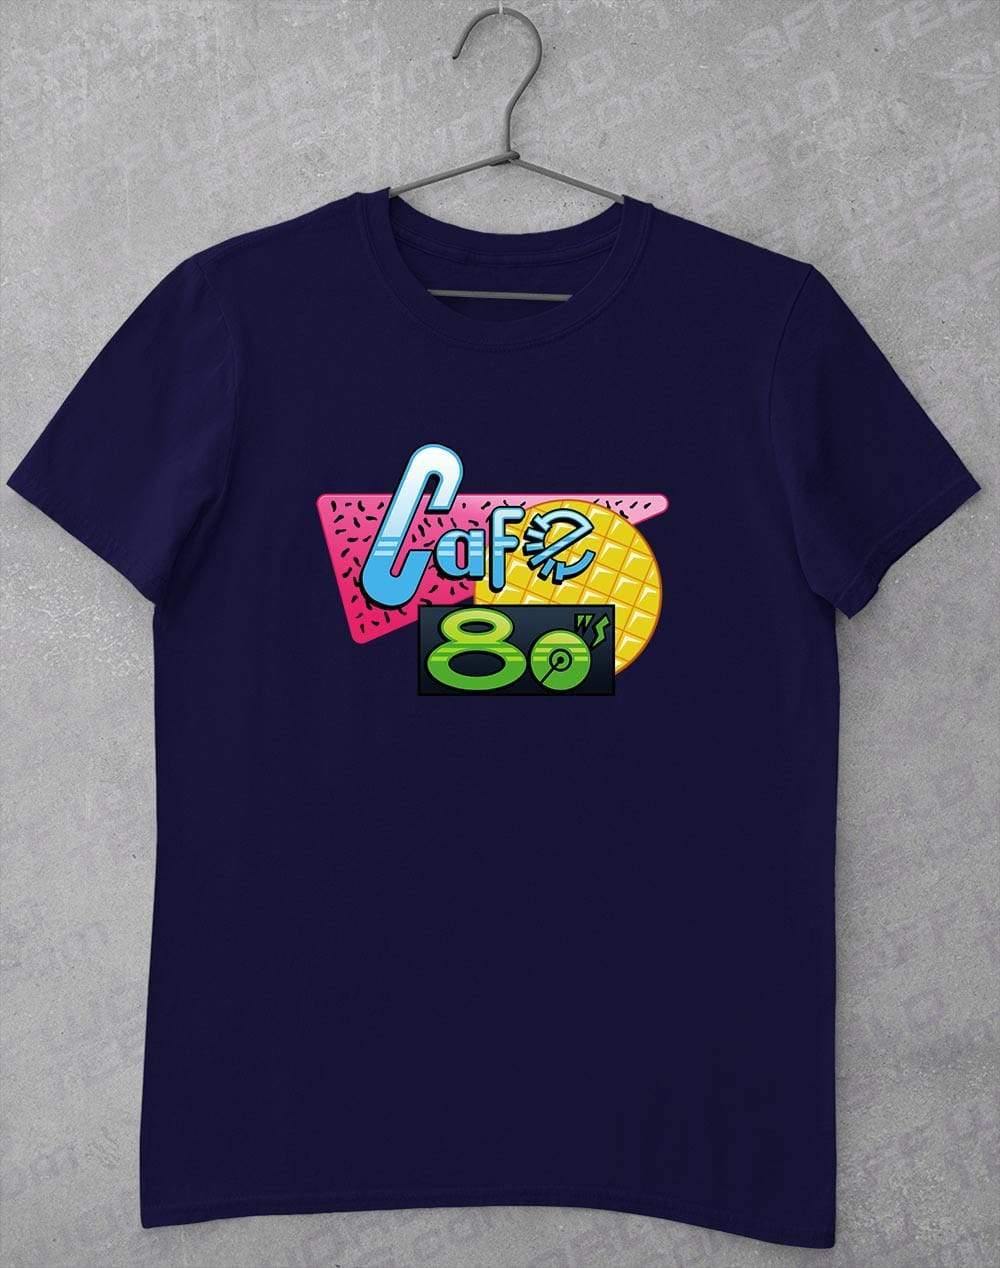 Cafe 80's T-Shirt S / Navy  - Off World Tees